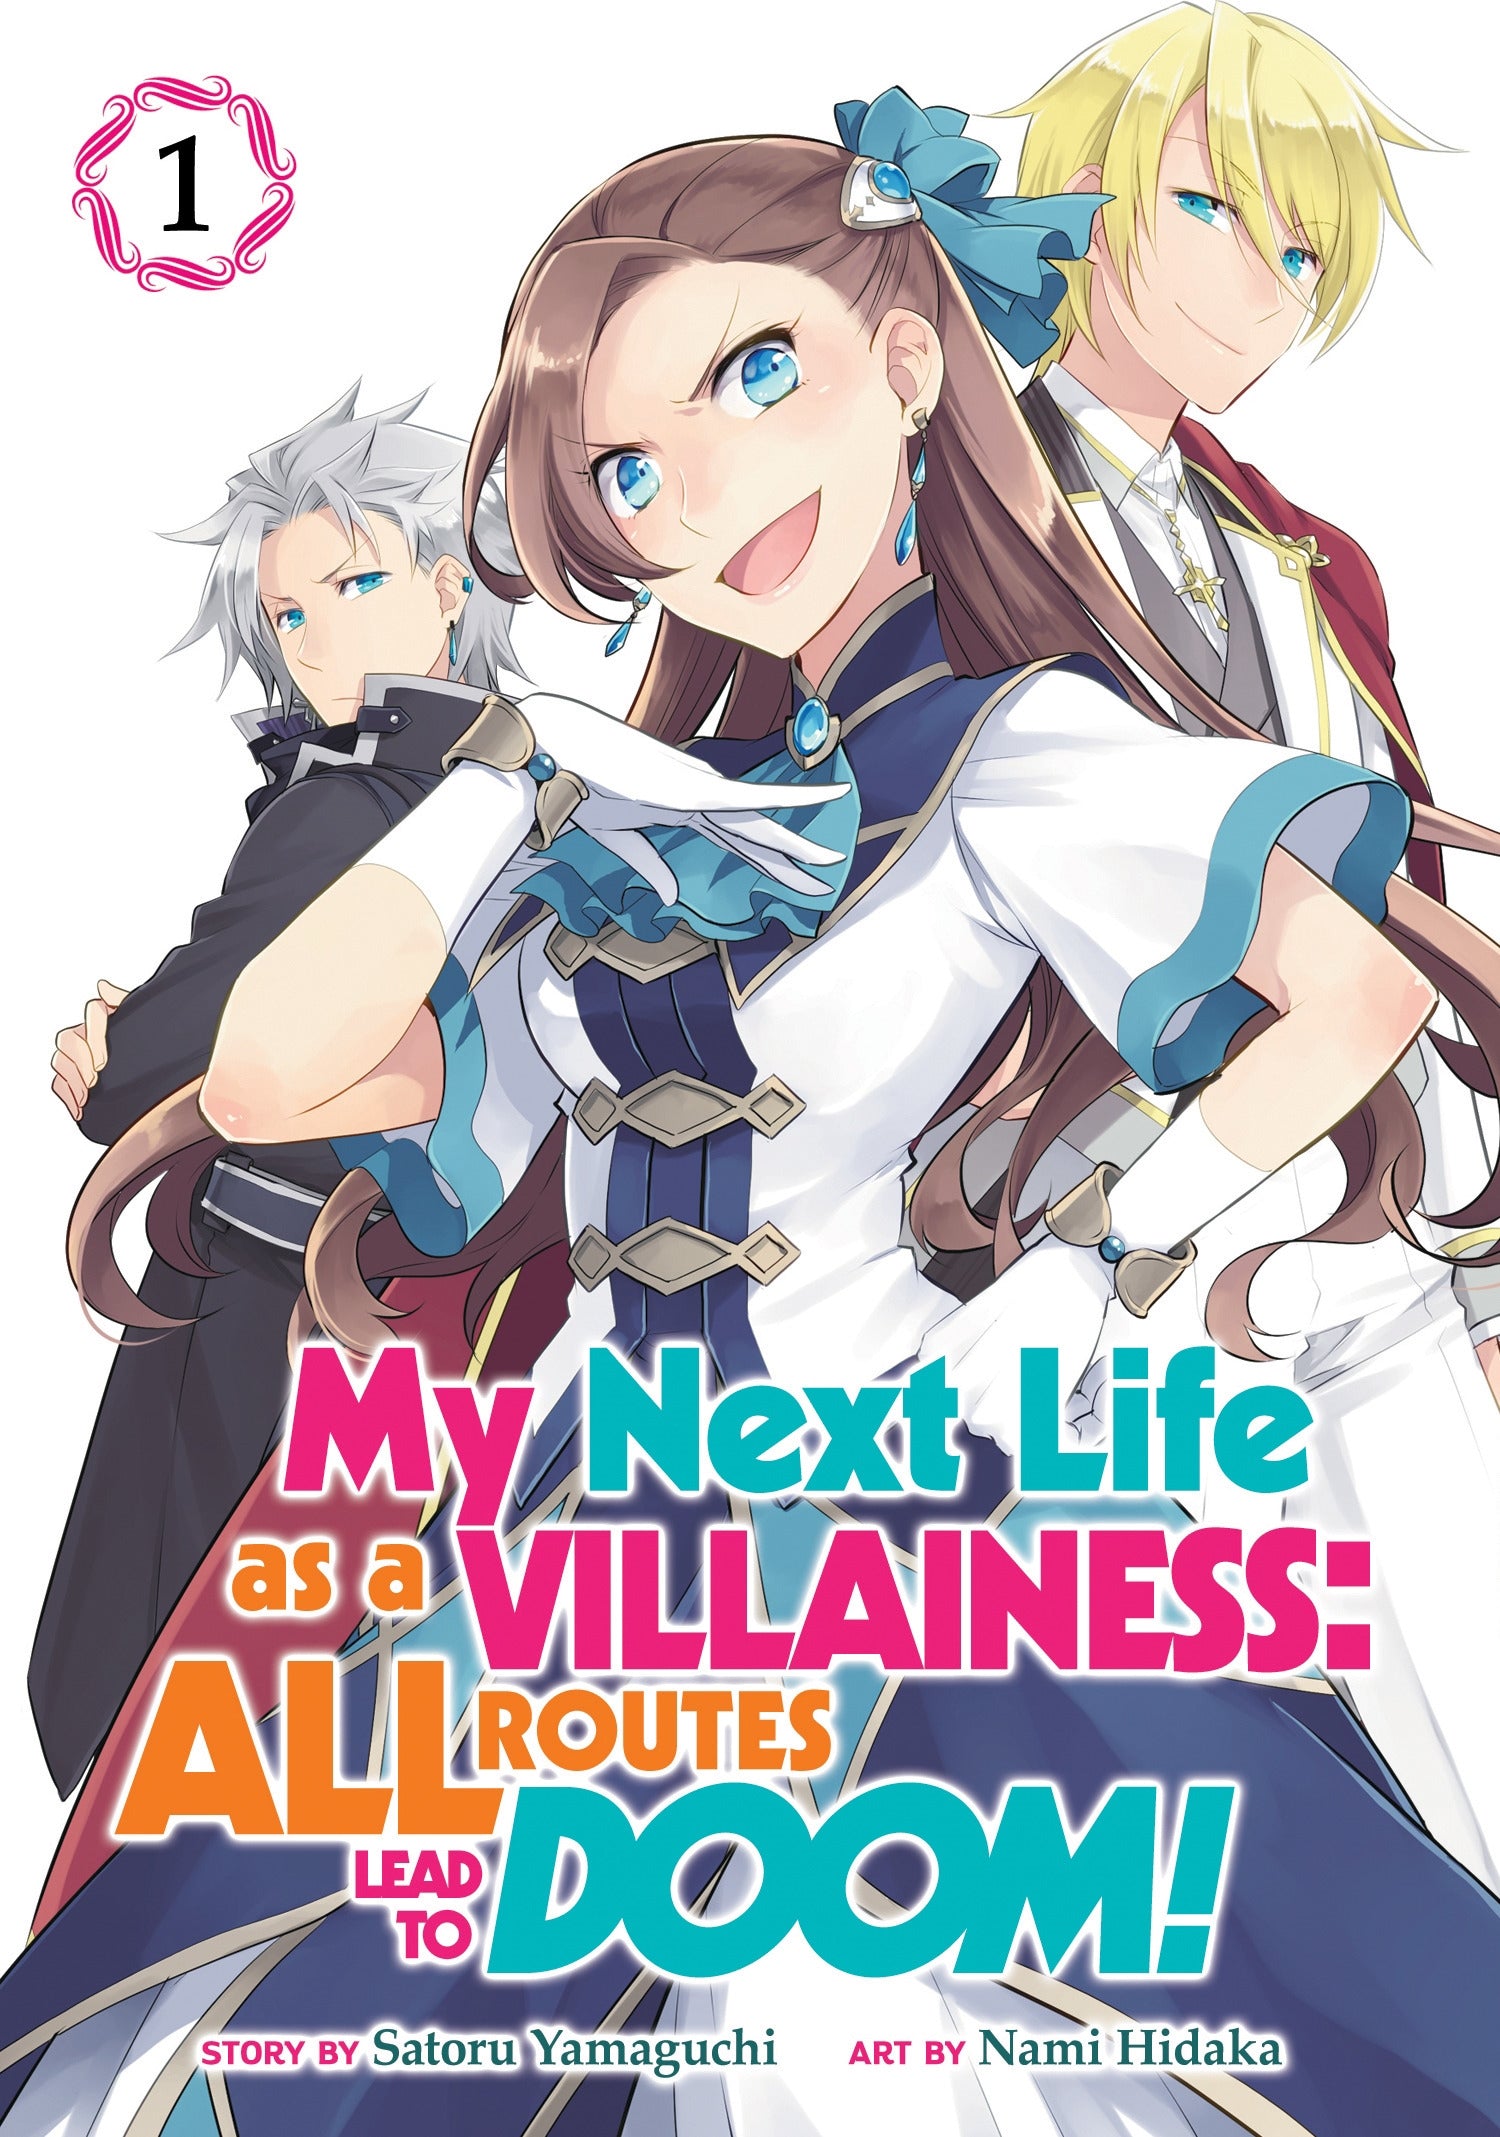 My Next Life as a Villainess All Routes Lead to Doom! (Manga) Vol. 1